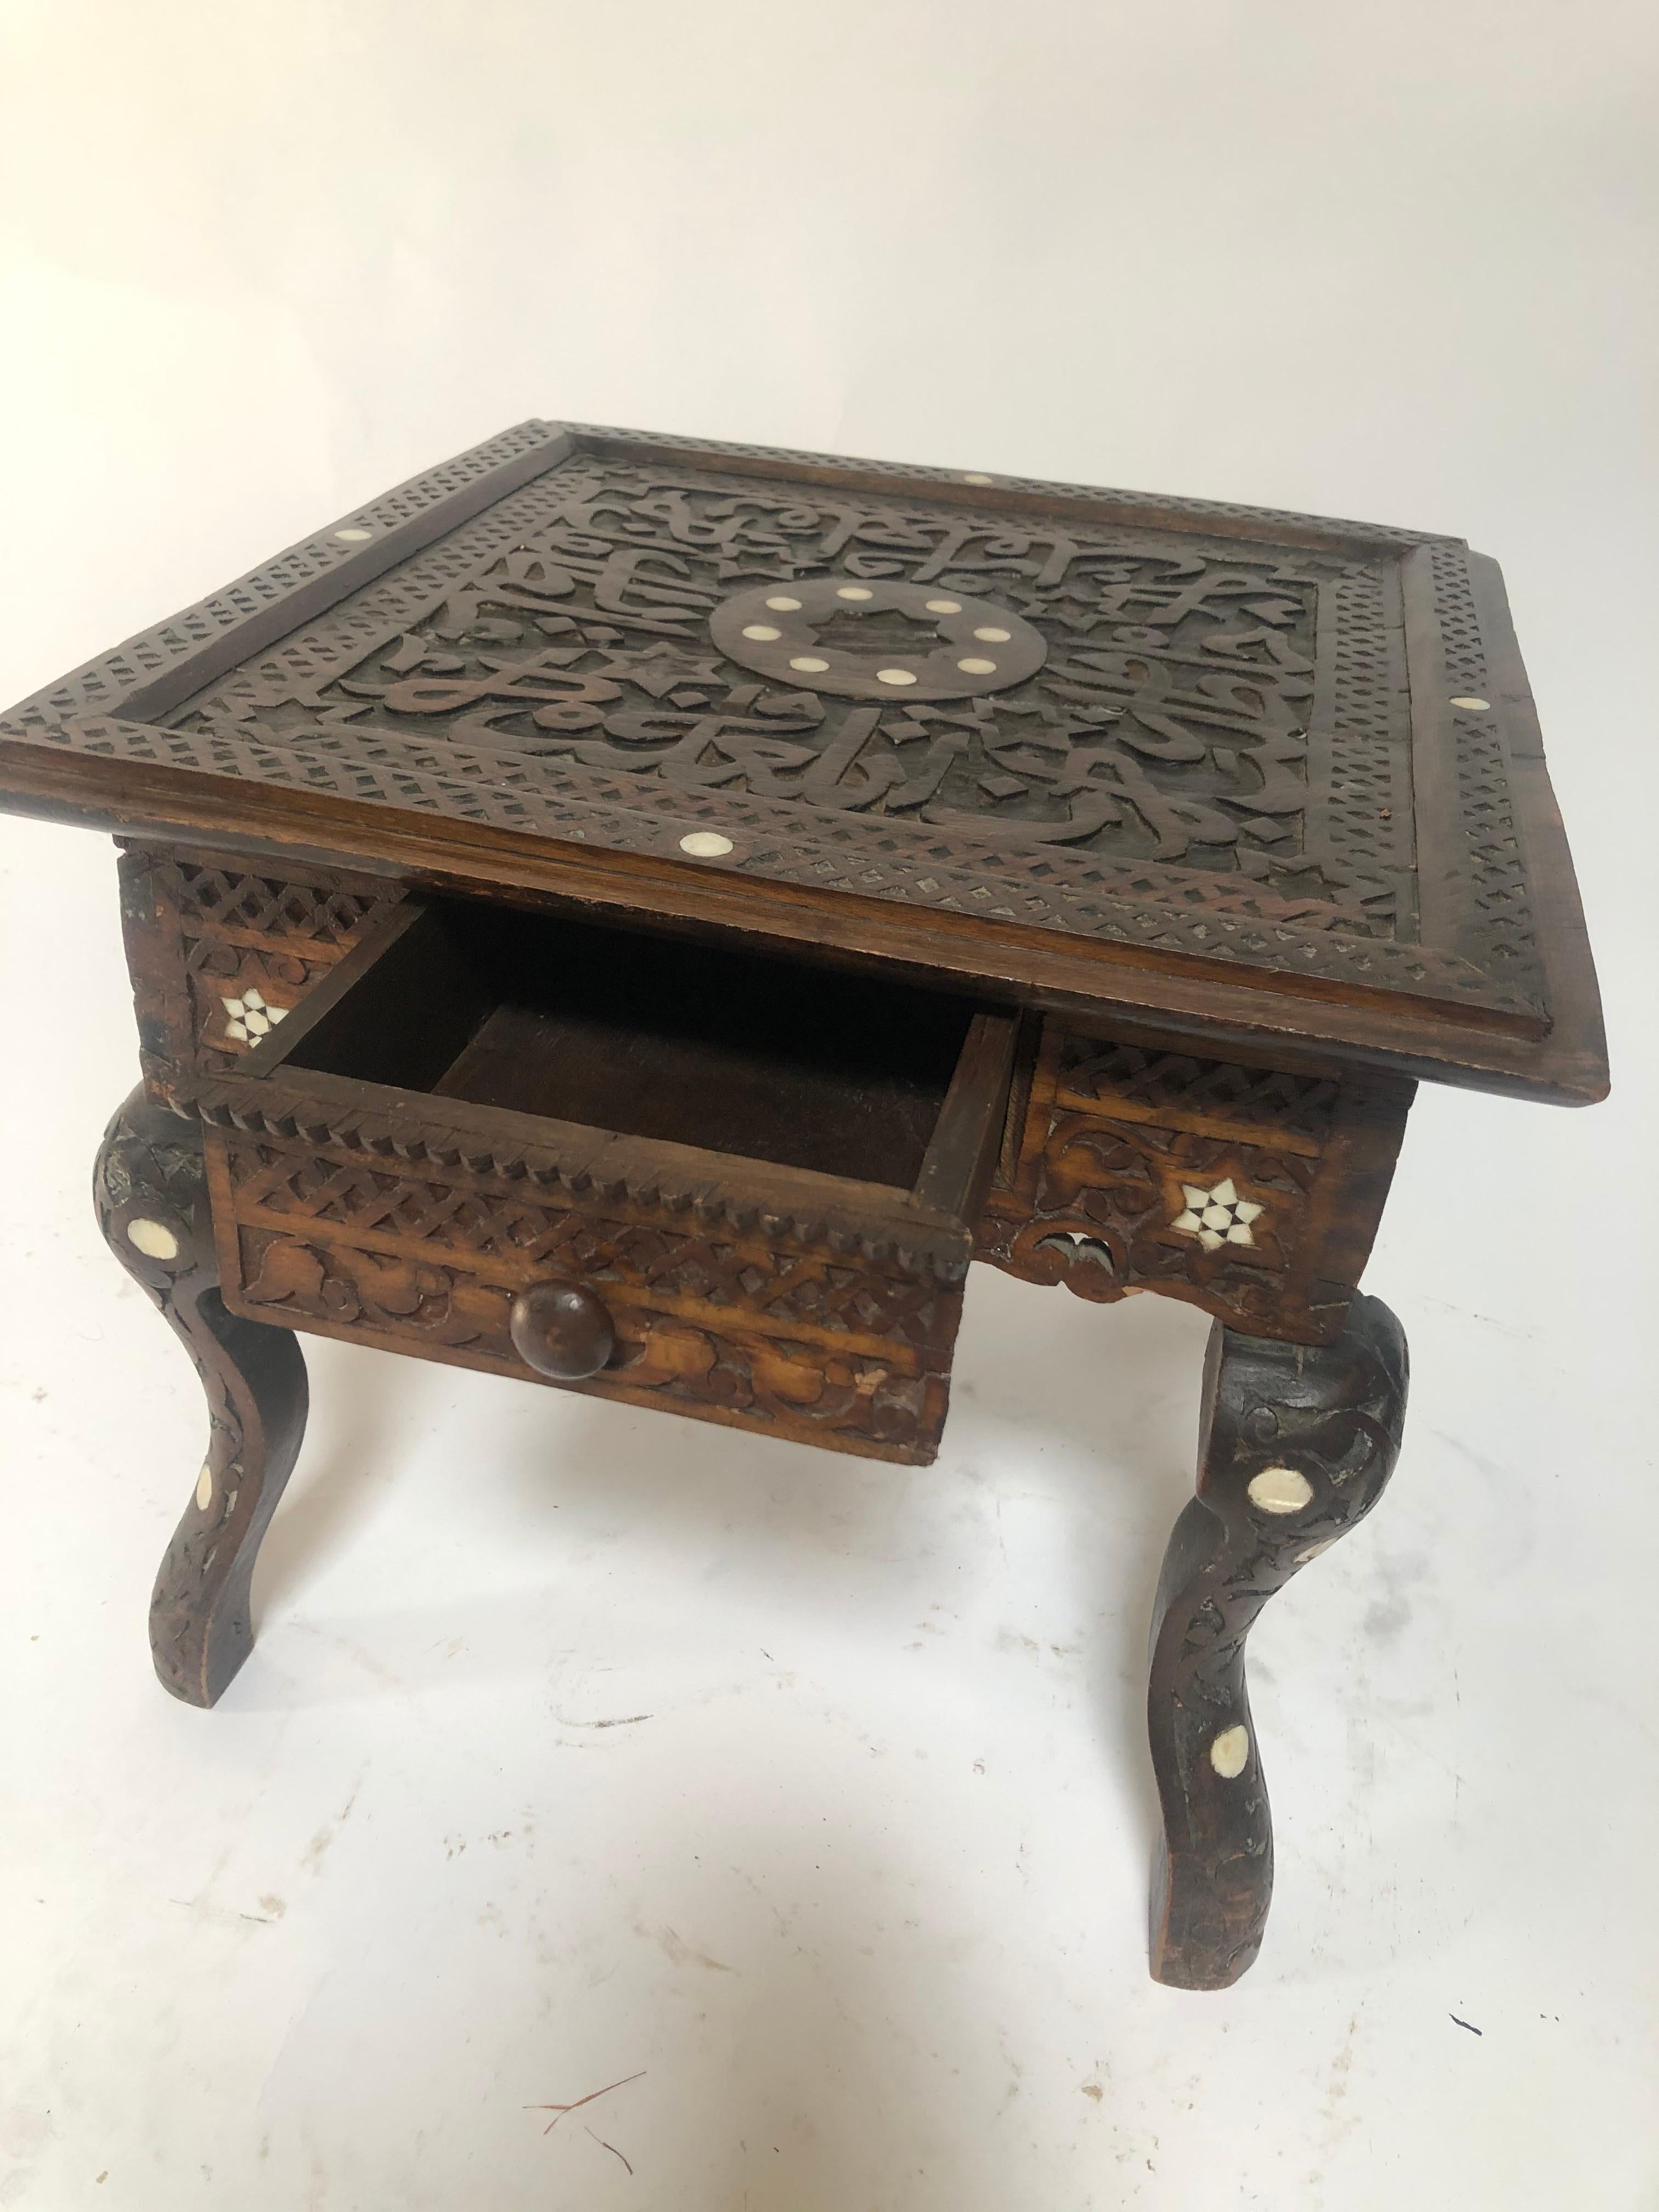 19th century Syrian inlay table with single-drawer.